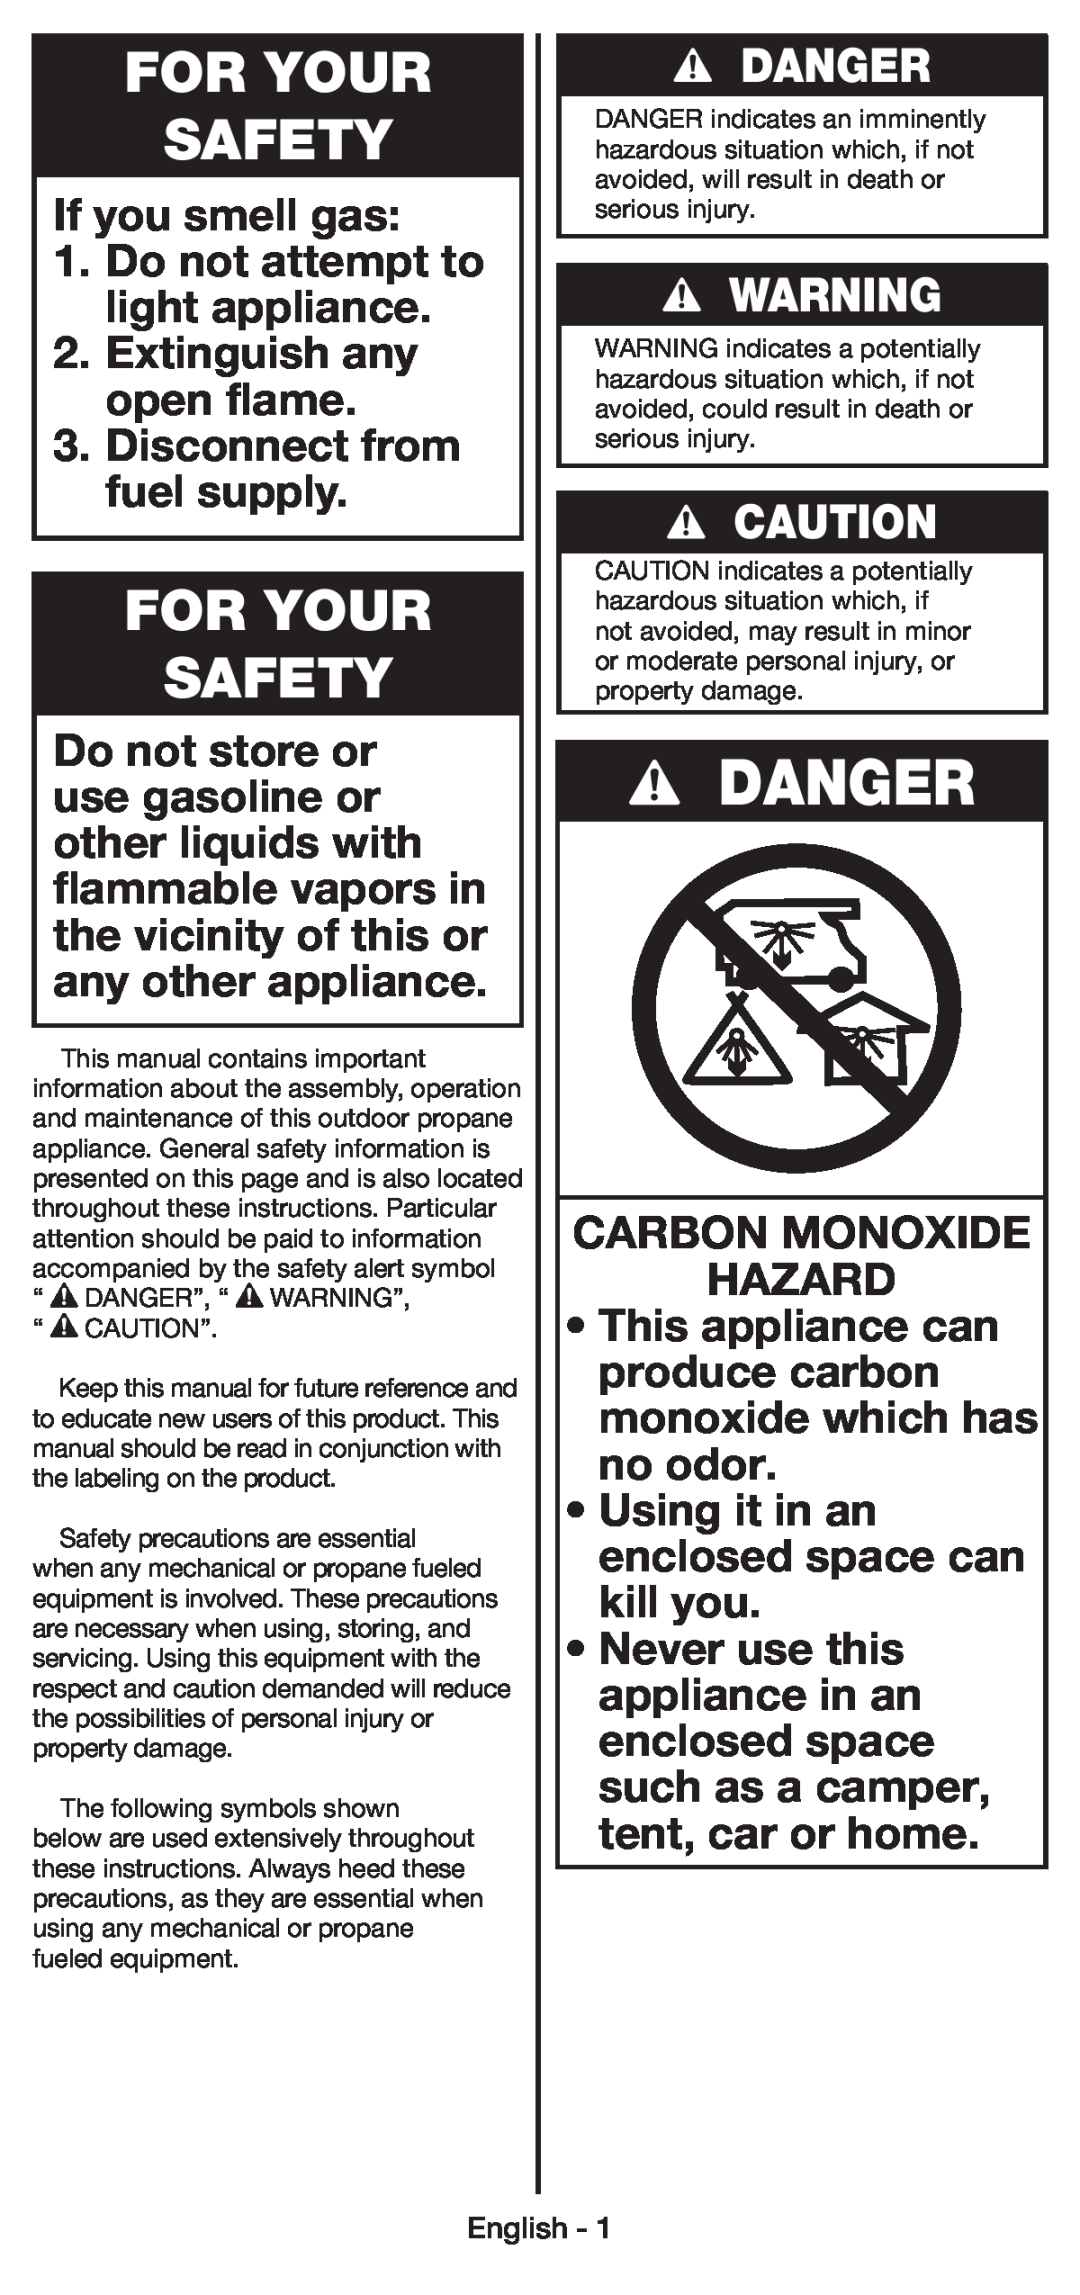 Coleman 5430E manual Danger, For Your Safety, If you smell gas 1. Do not attempt to light appliance, Carbon Monoxide Hazard 